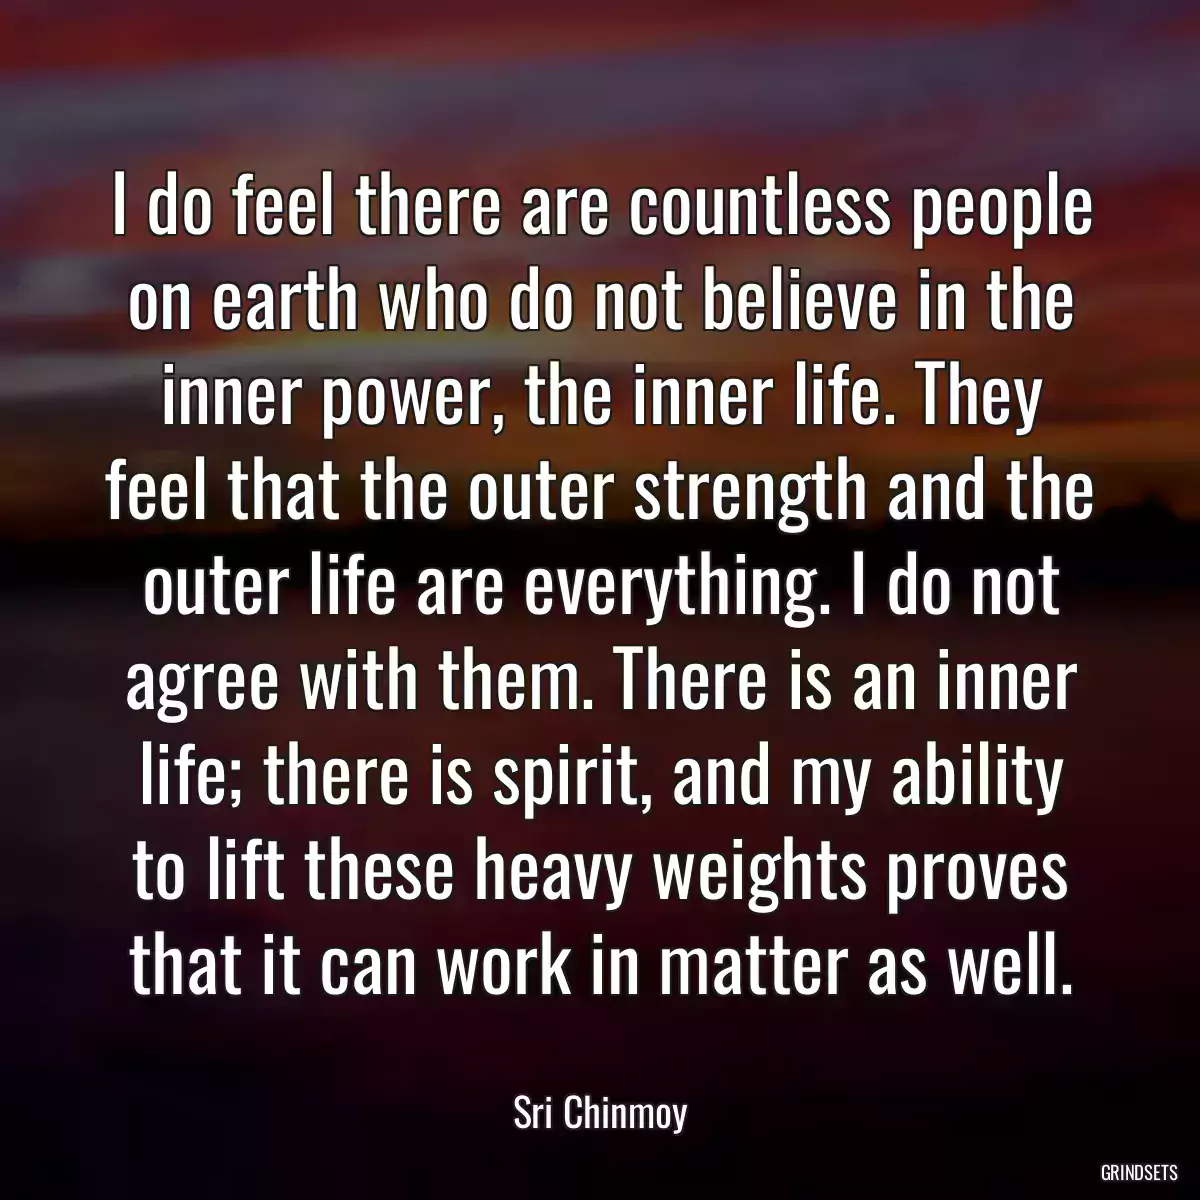 I do feel there are countless people on earth who do not believe in the inner power, the inner life. They feel that the outer strength and the outer life are everything. I do not agree with them. There is an inner life; there is spirit, and my ability to lift these heavy weights proves that it can work in matter as well.